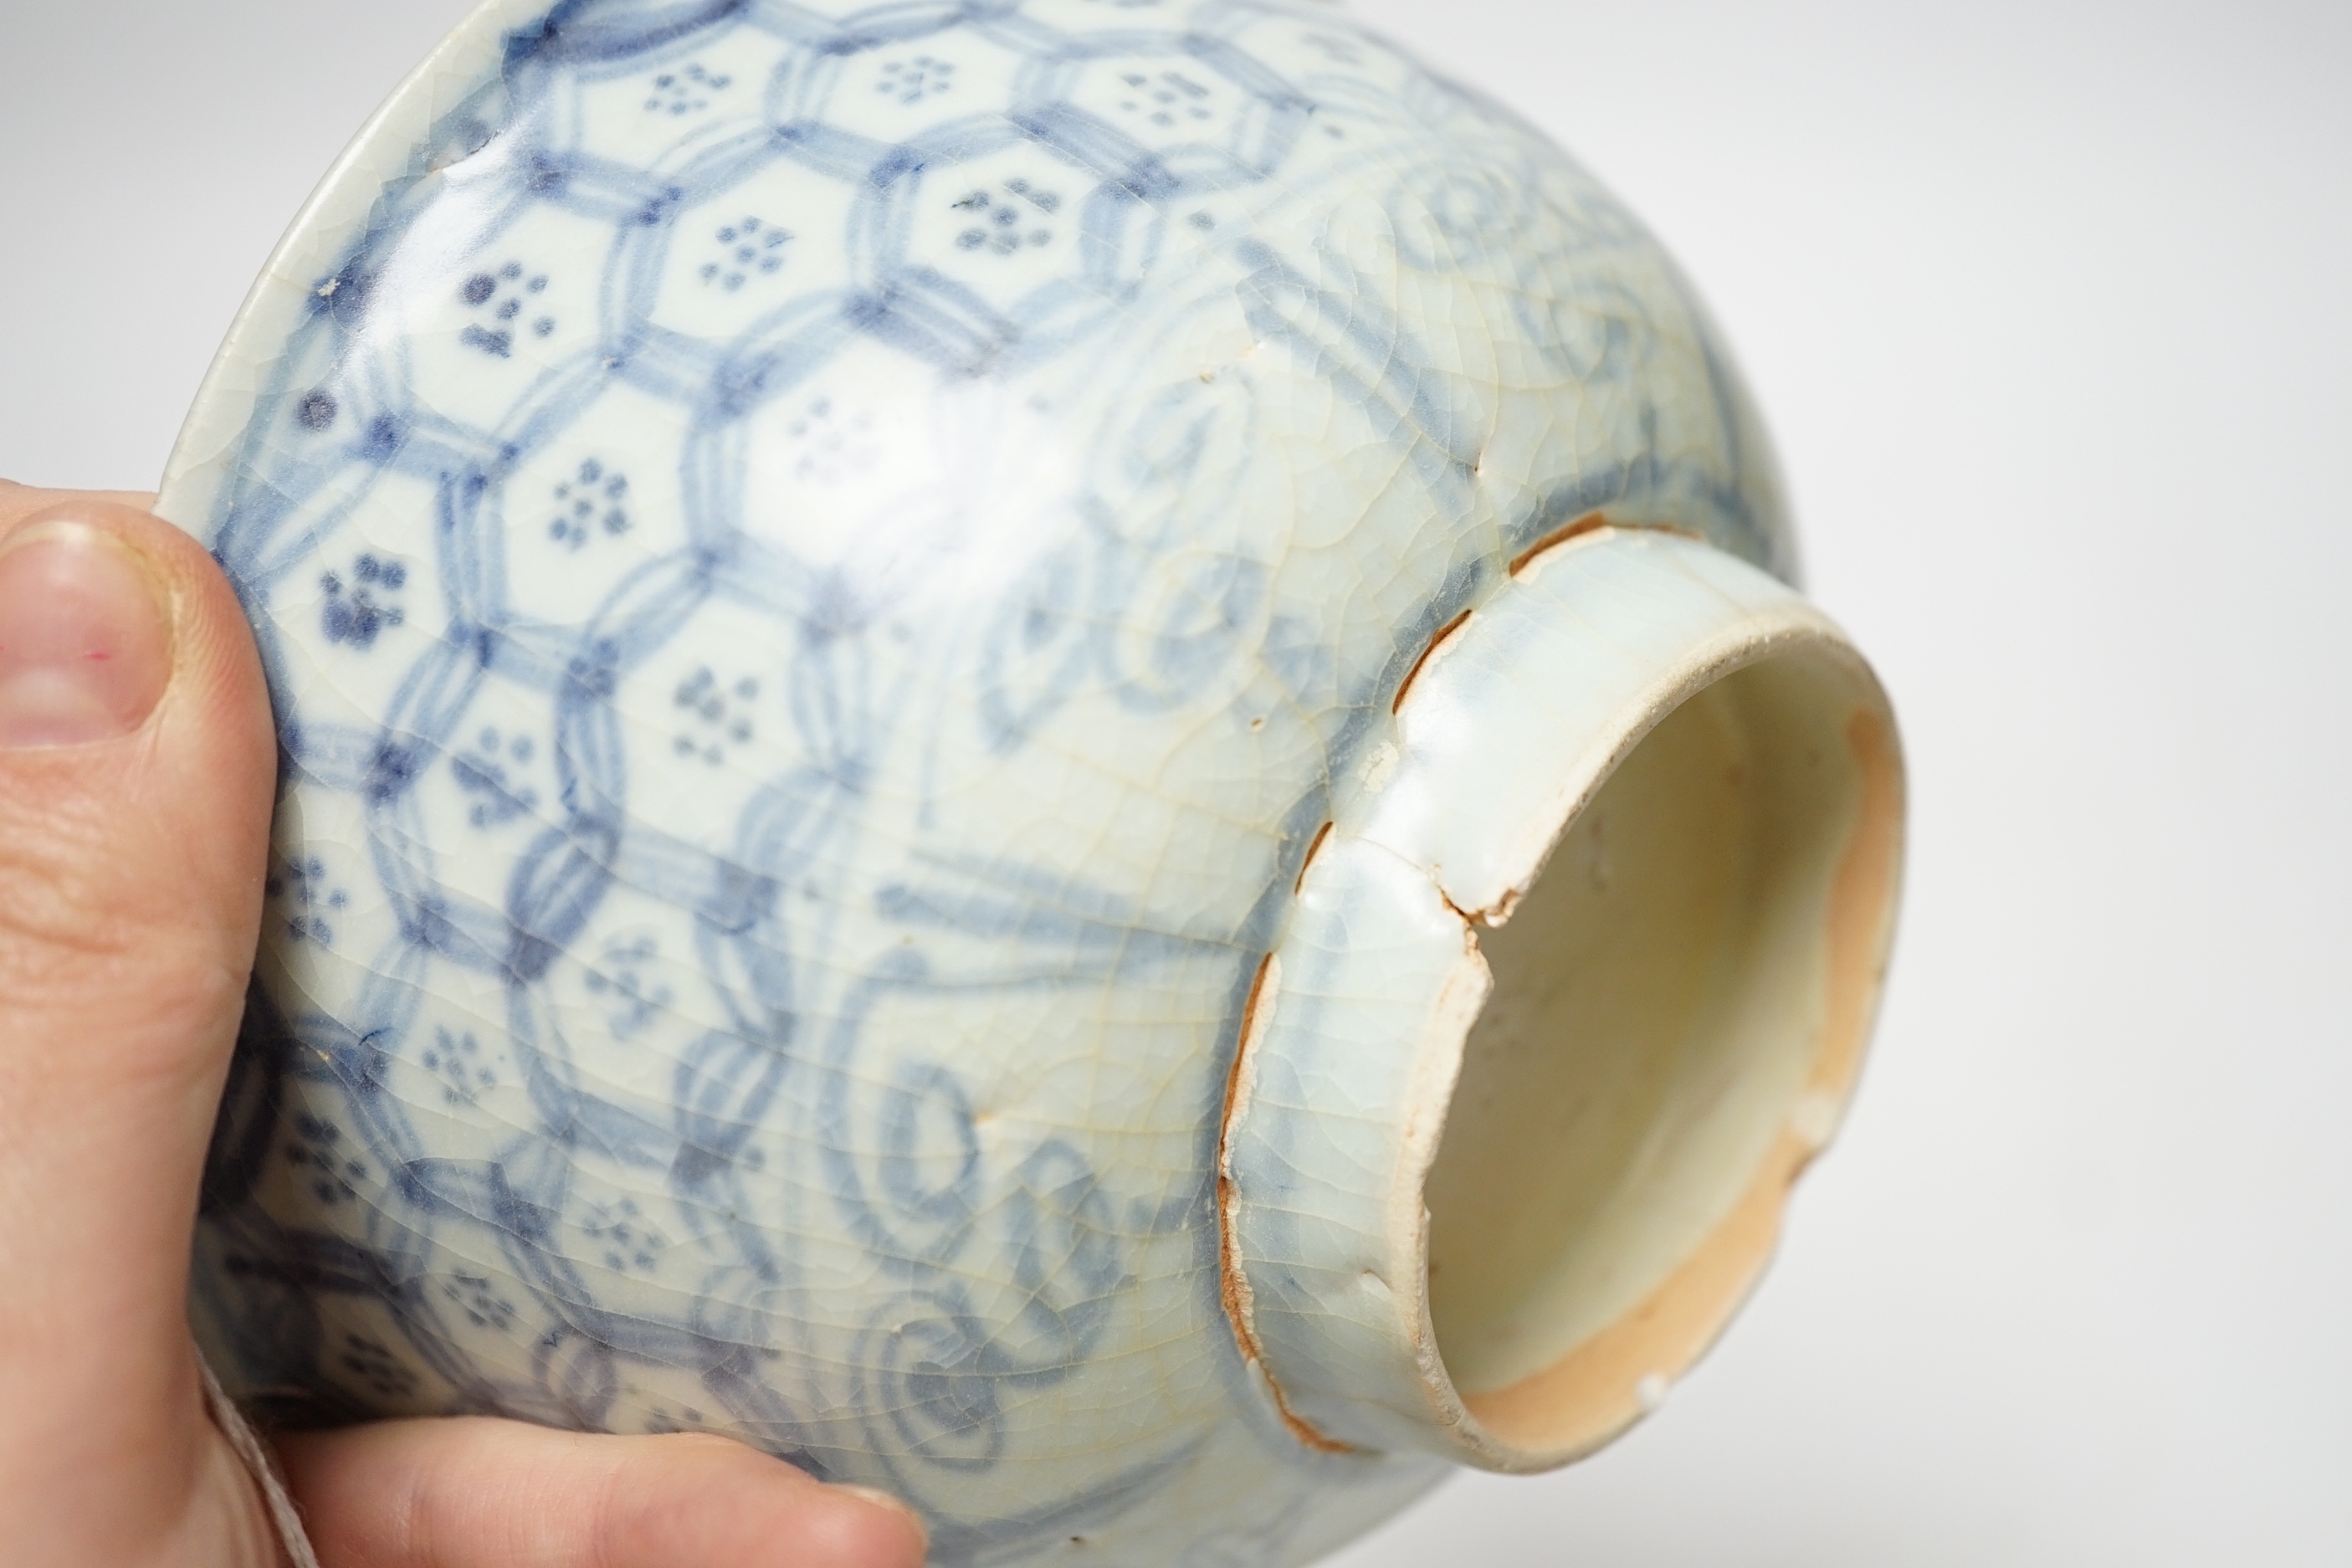 A Chinese blue and white bowl, 15th century, Ming dynasty, 14cm diameter